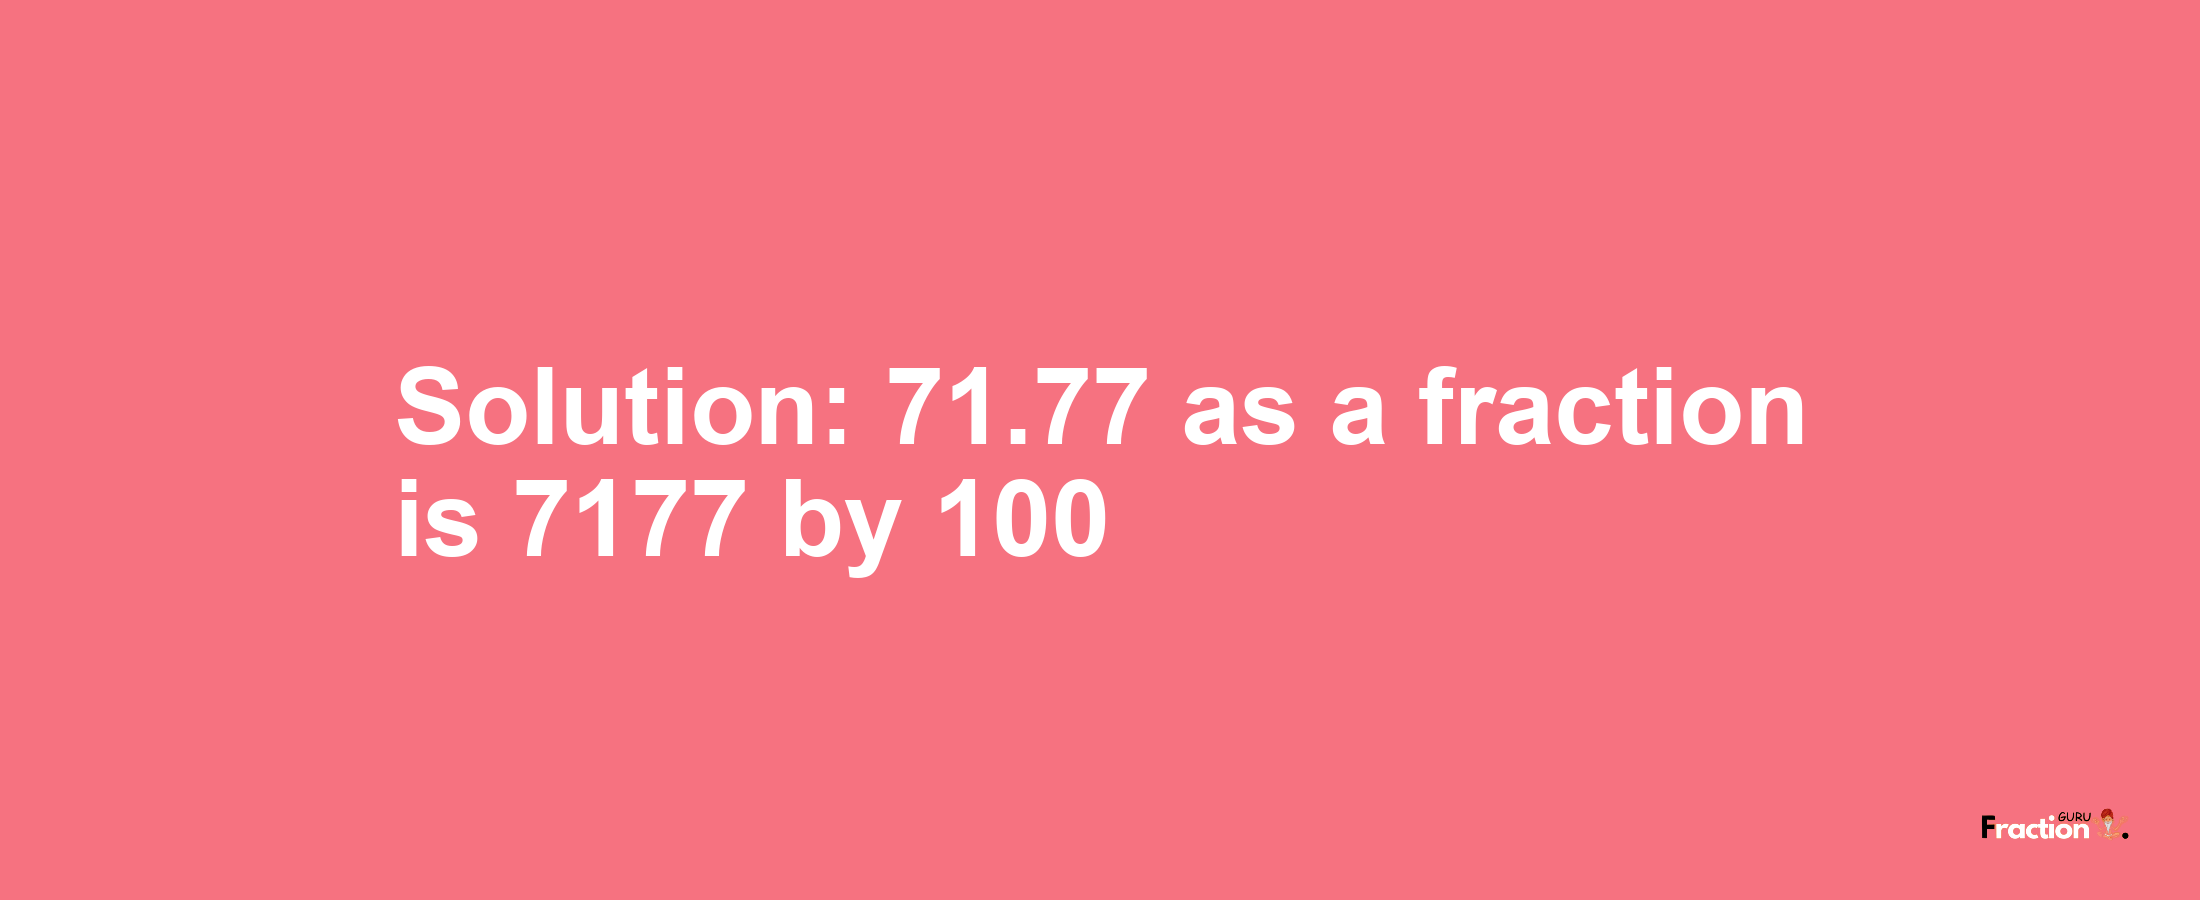 Solution:71.77 as a fraction is 7177/100